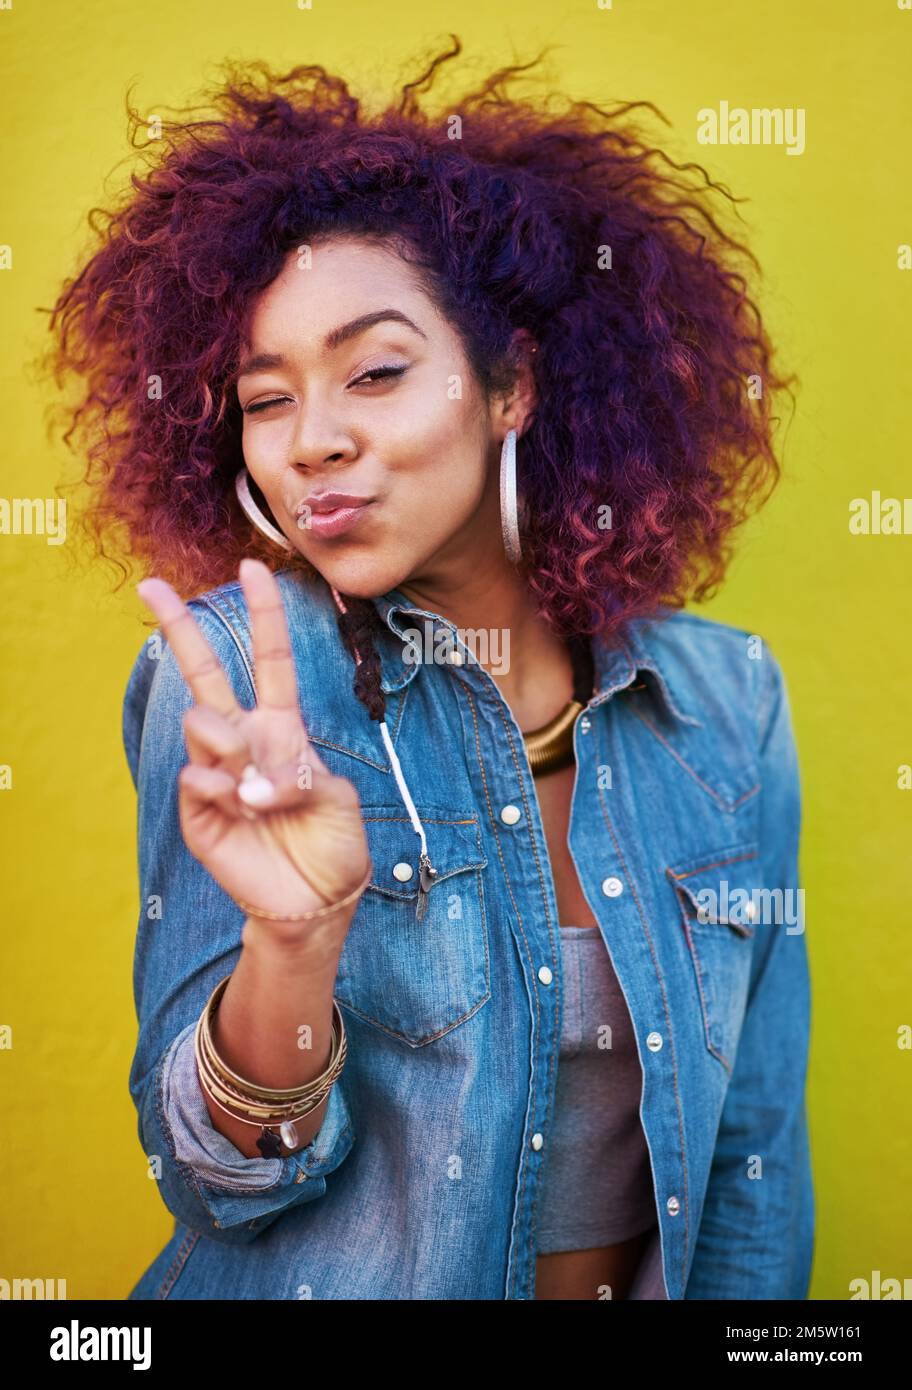 Keepin it real. an attractive young woman showing the peace sign. Stock Photo